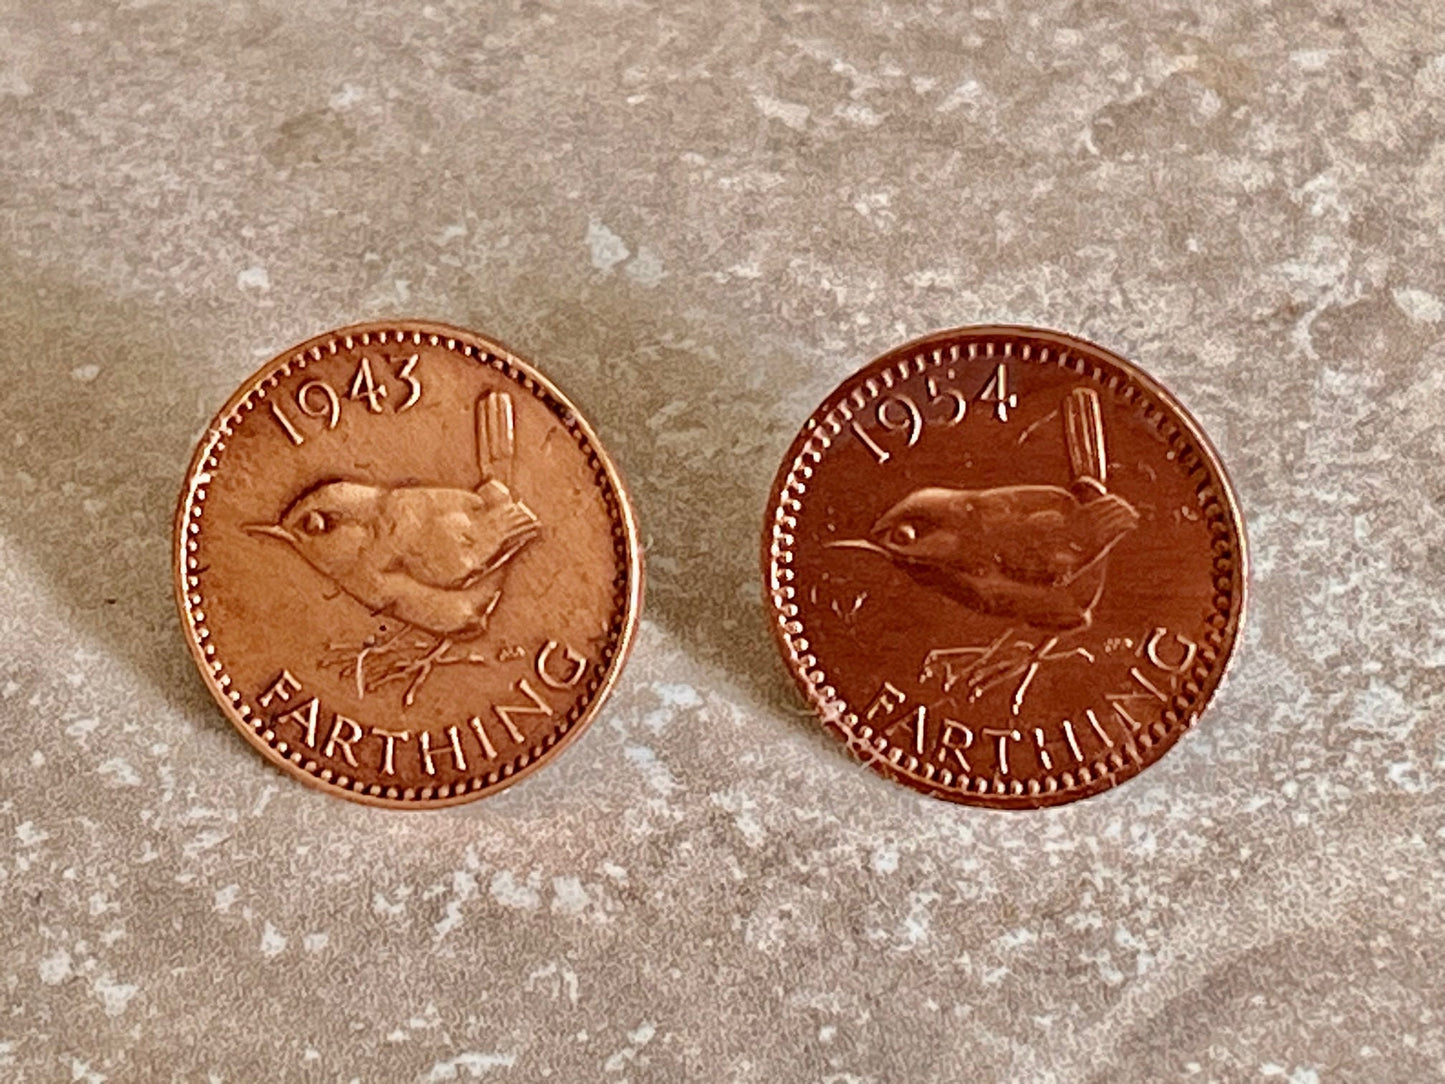 British 1 Farthing Coin Stud Earrings Personal Necklace Old Vintage Handmade Jewelry Gift Friend Charm For Him Her World Coin Collector